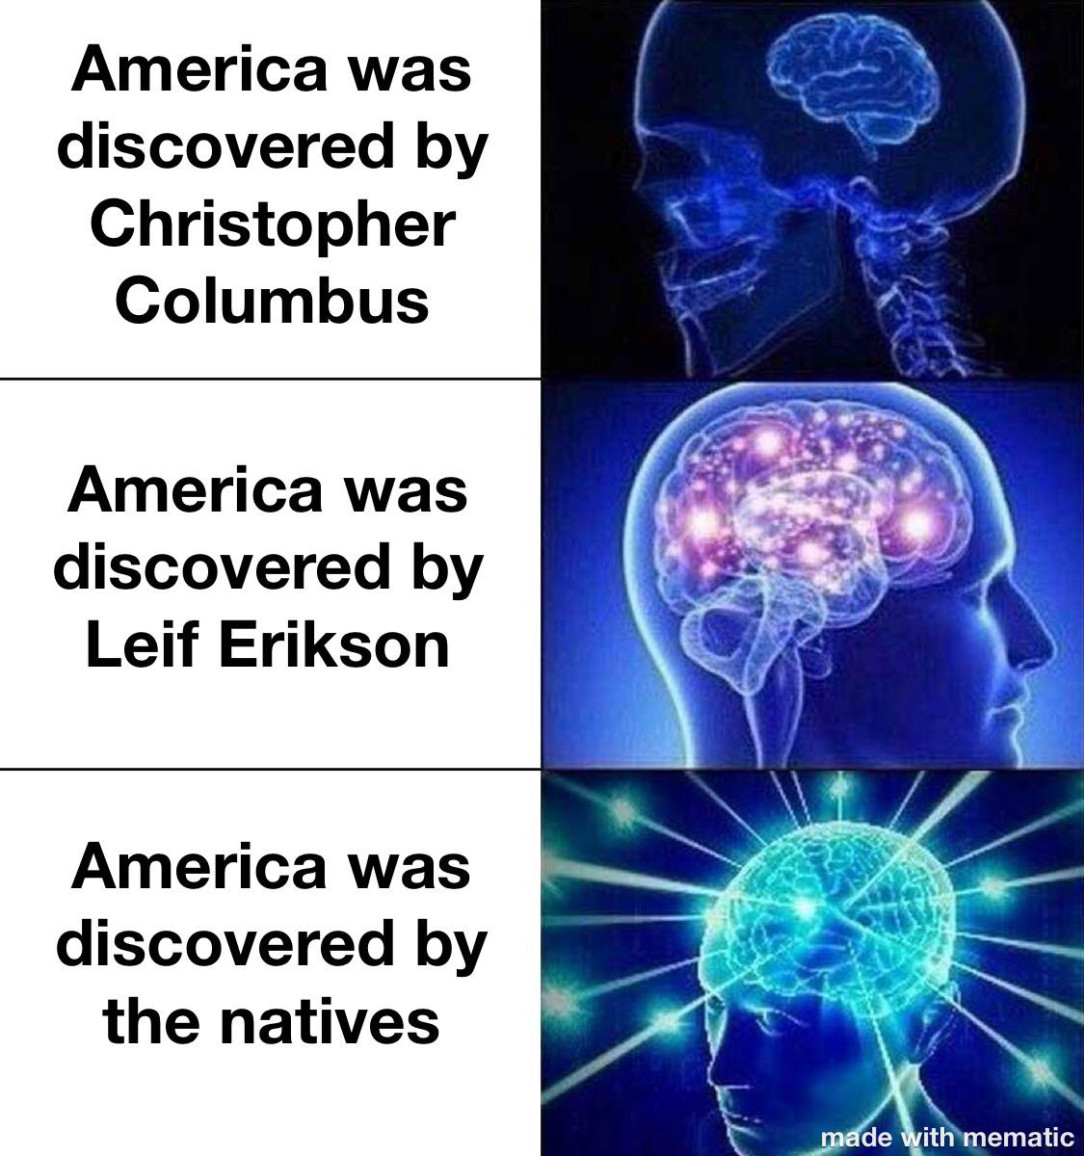 Who discovered America?